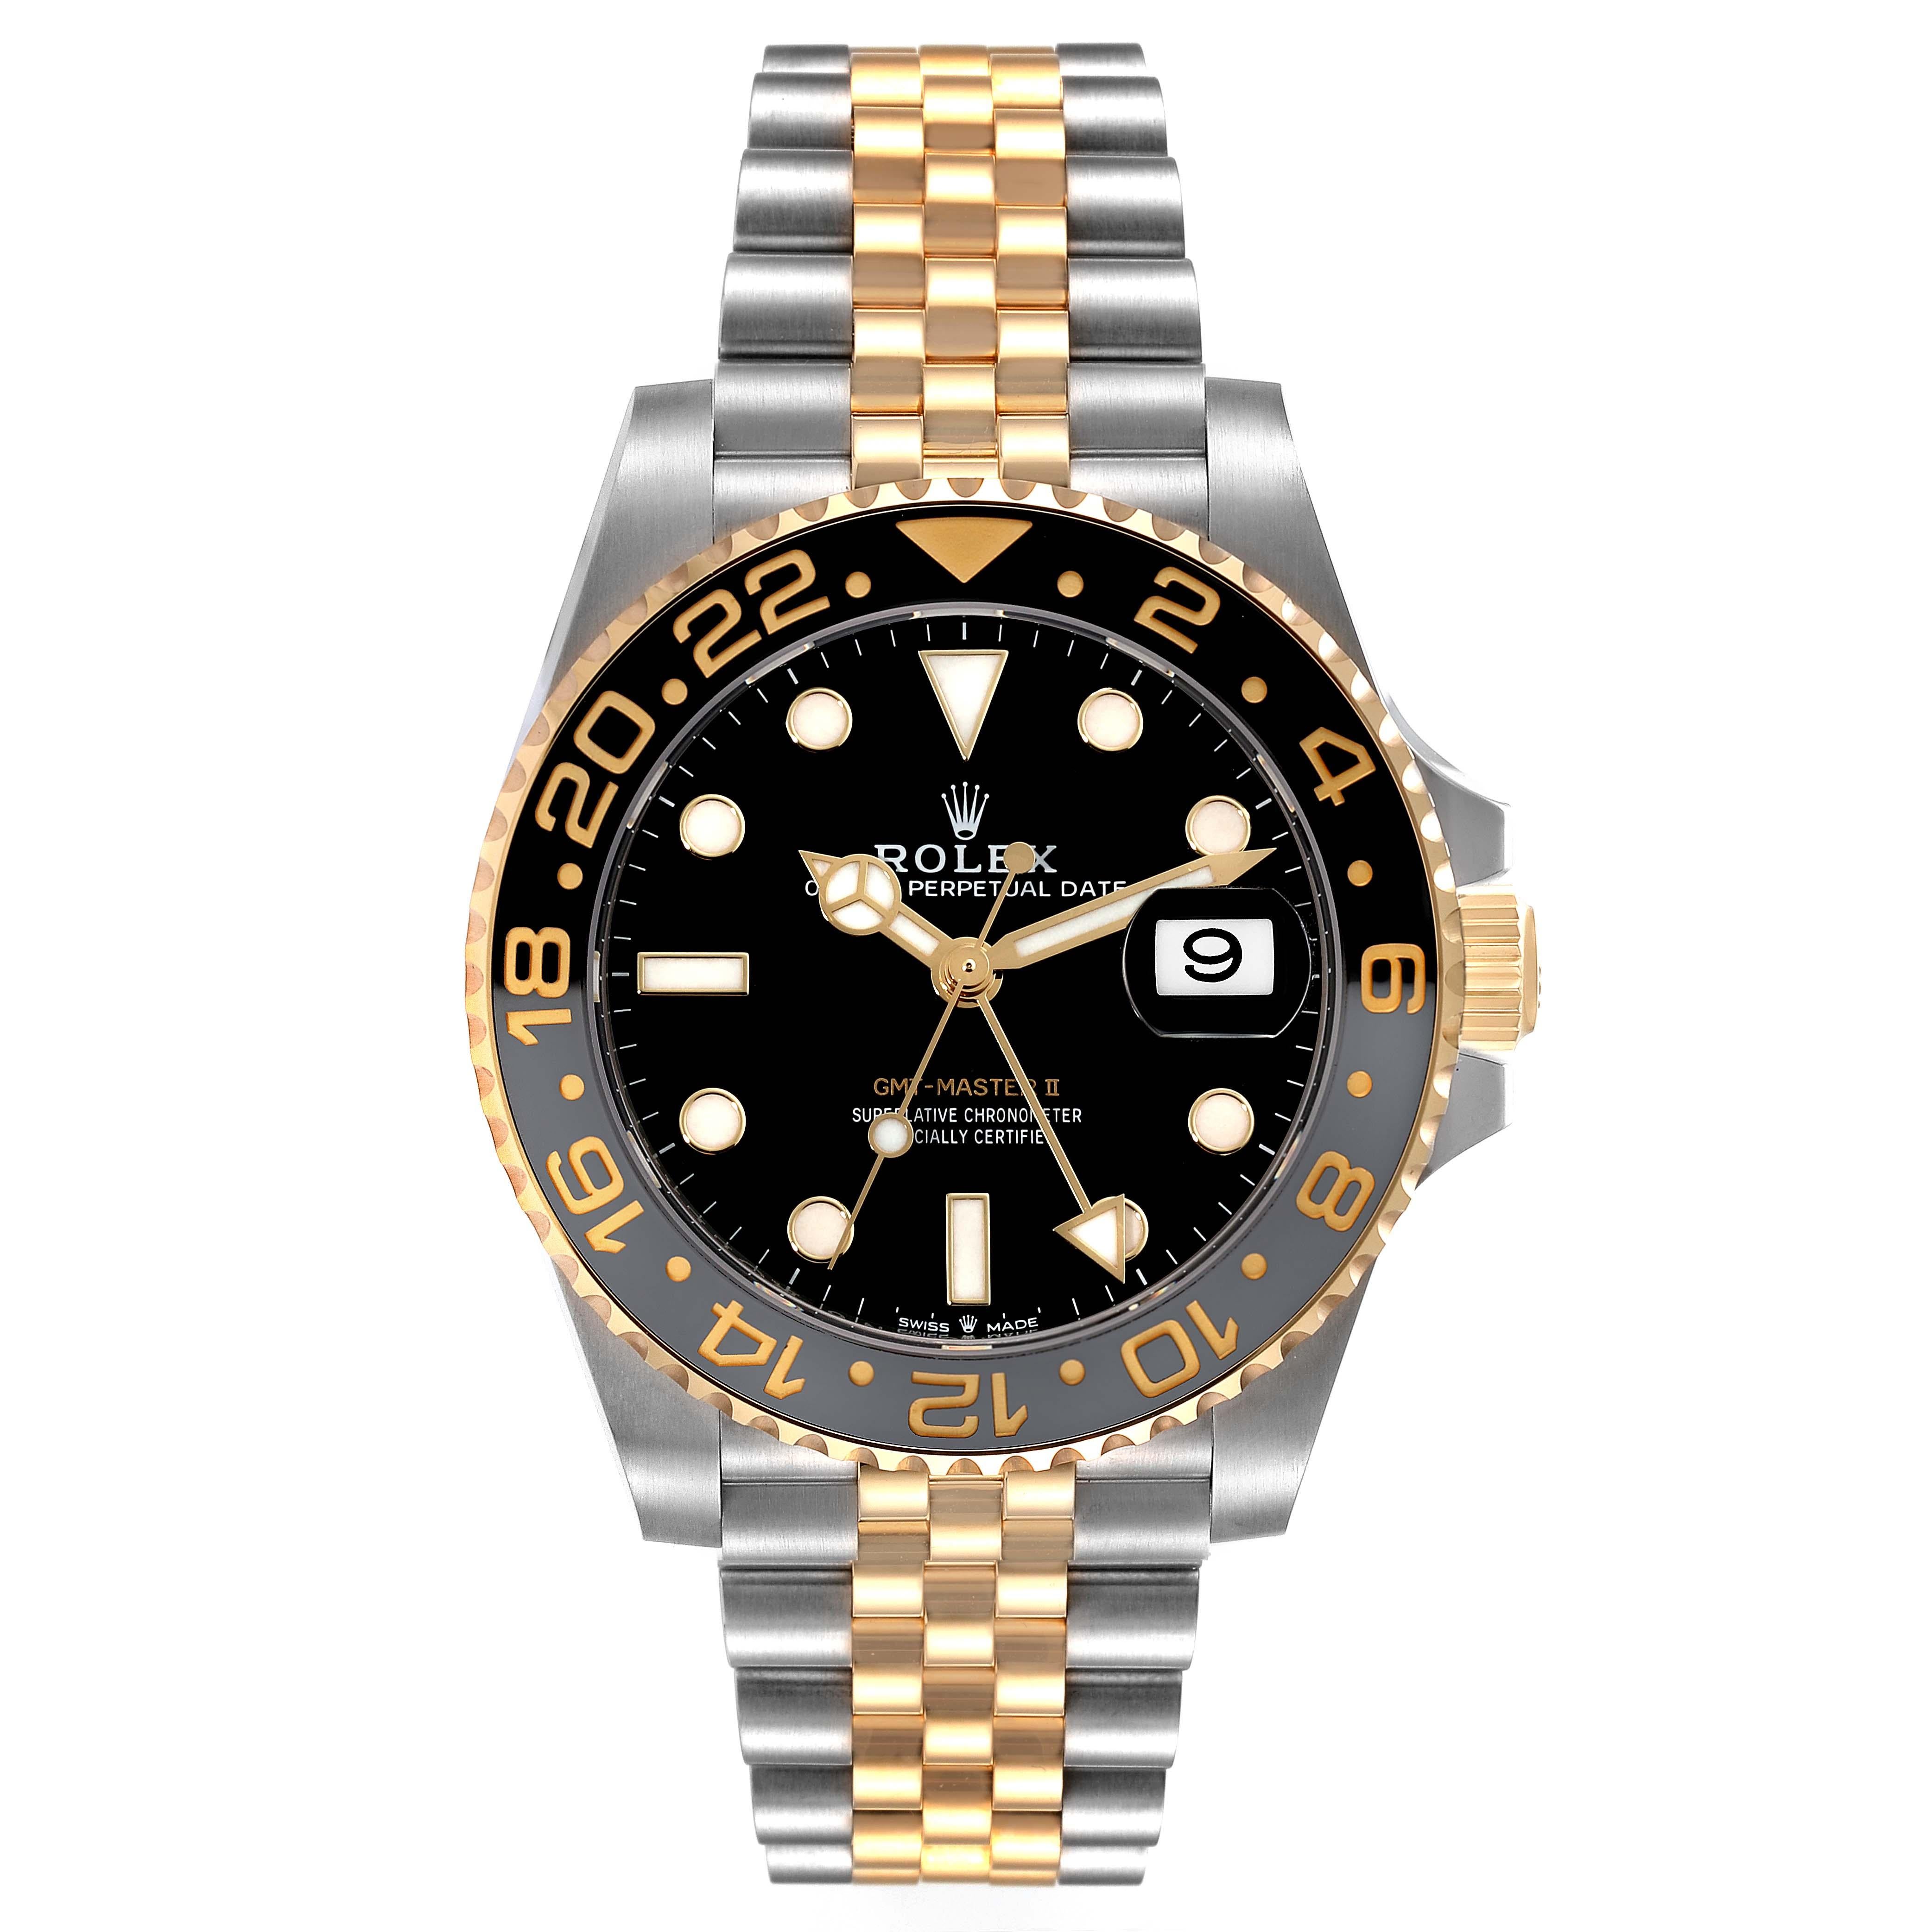 Rolex GMT Master II Yellow Gold Steel Black Grey Bezel Mens Watch 126713. Officially certified chronometer self-winding movement with GMT function. Stainless steel case 40 mm in diameter. Rolex logo on yellow gold crown. 18k yellow gold